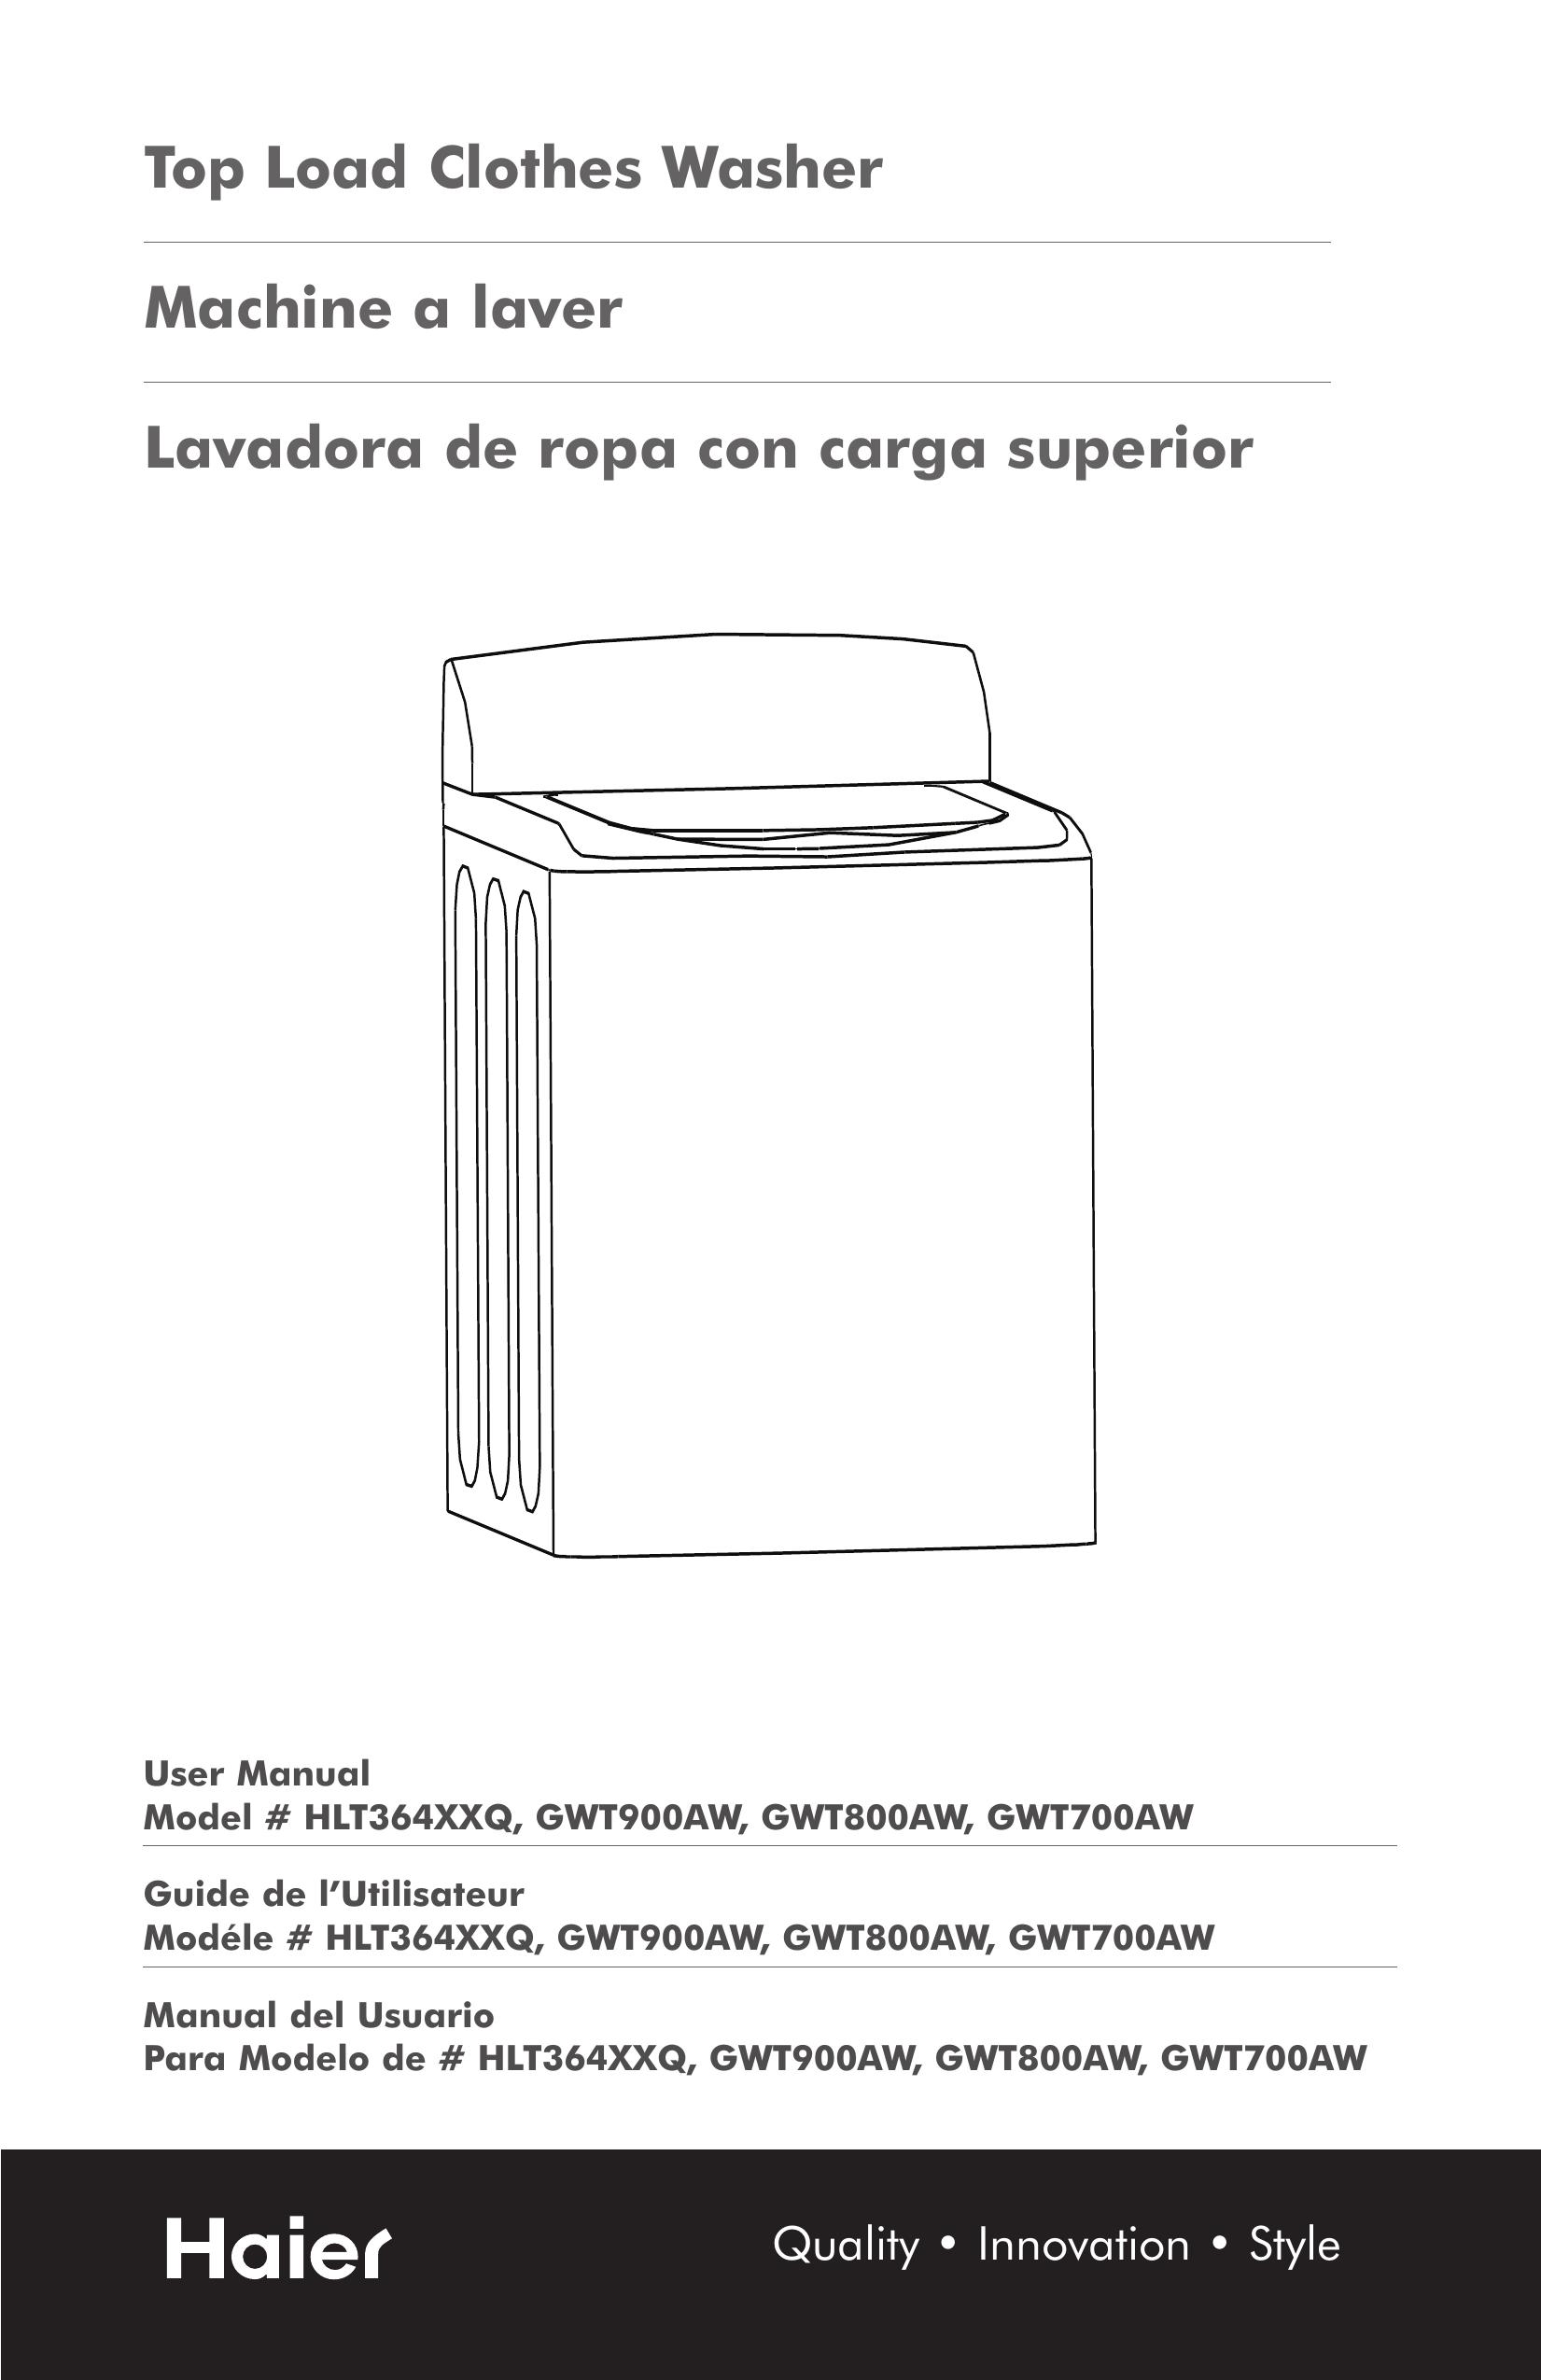 Haier GWT900AW Washer User Manual